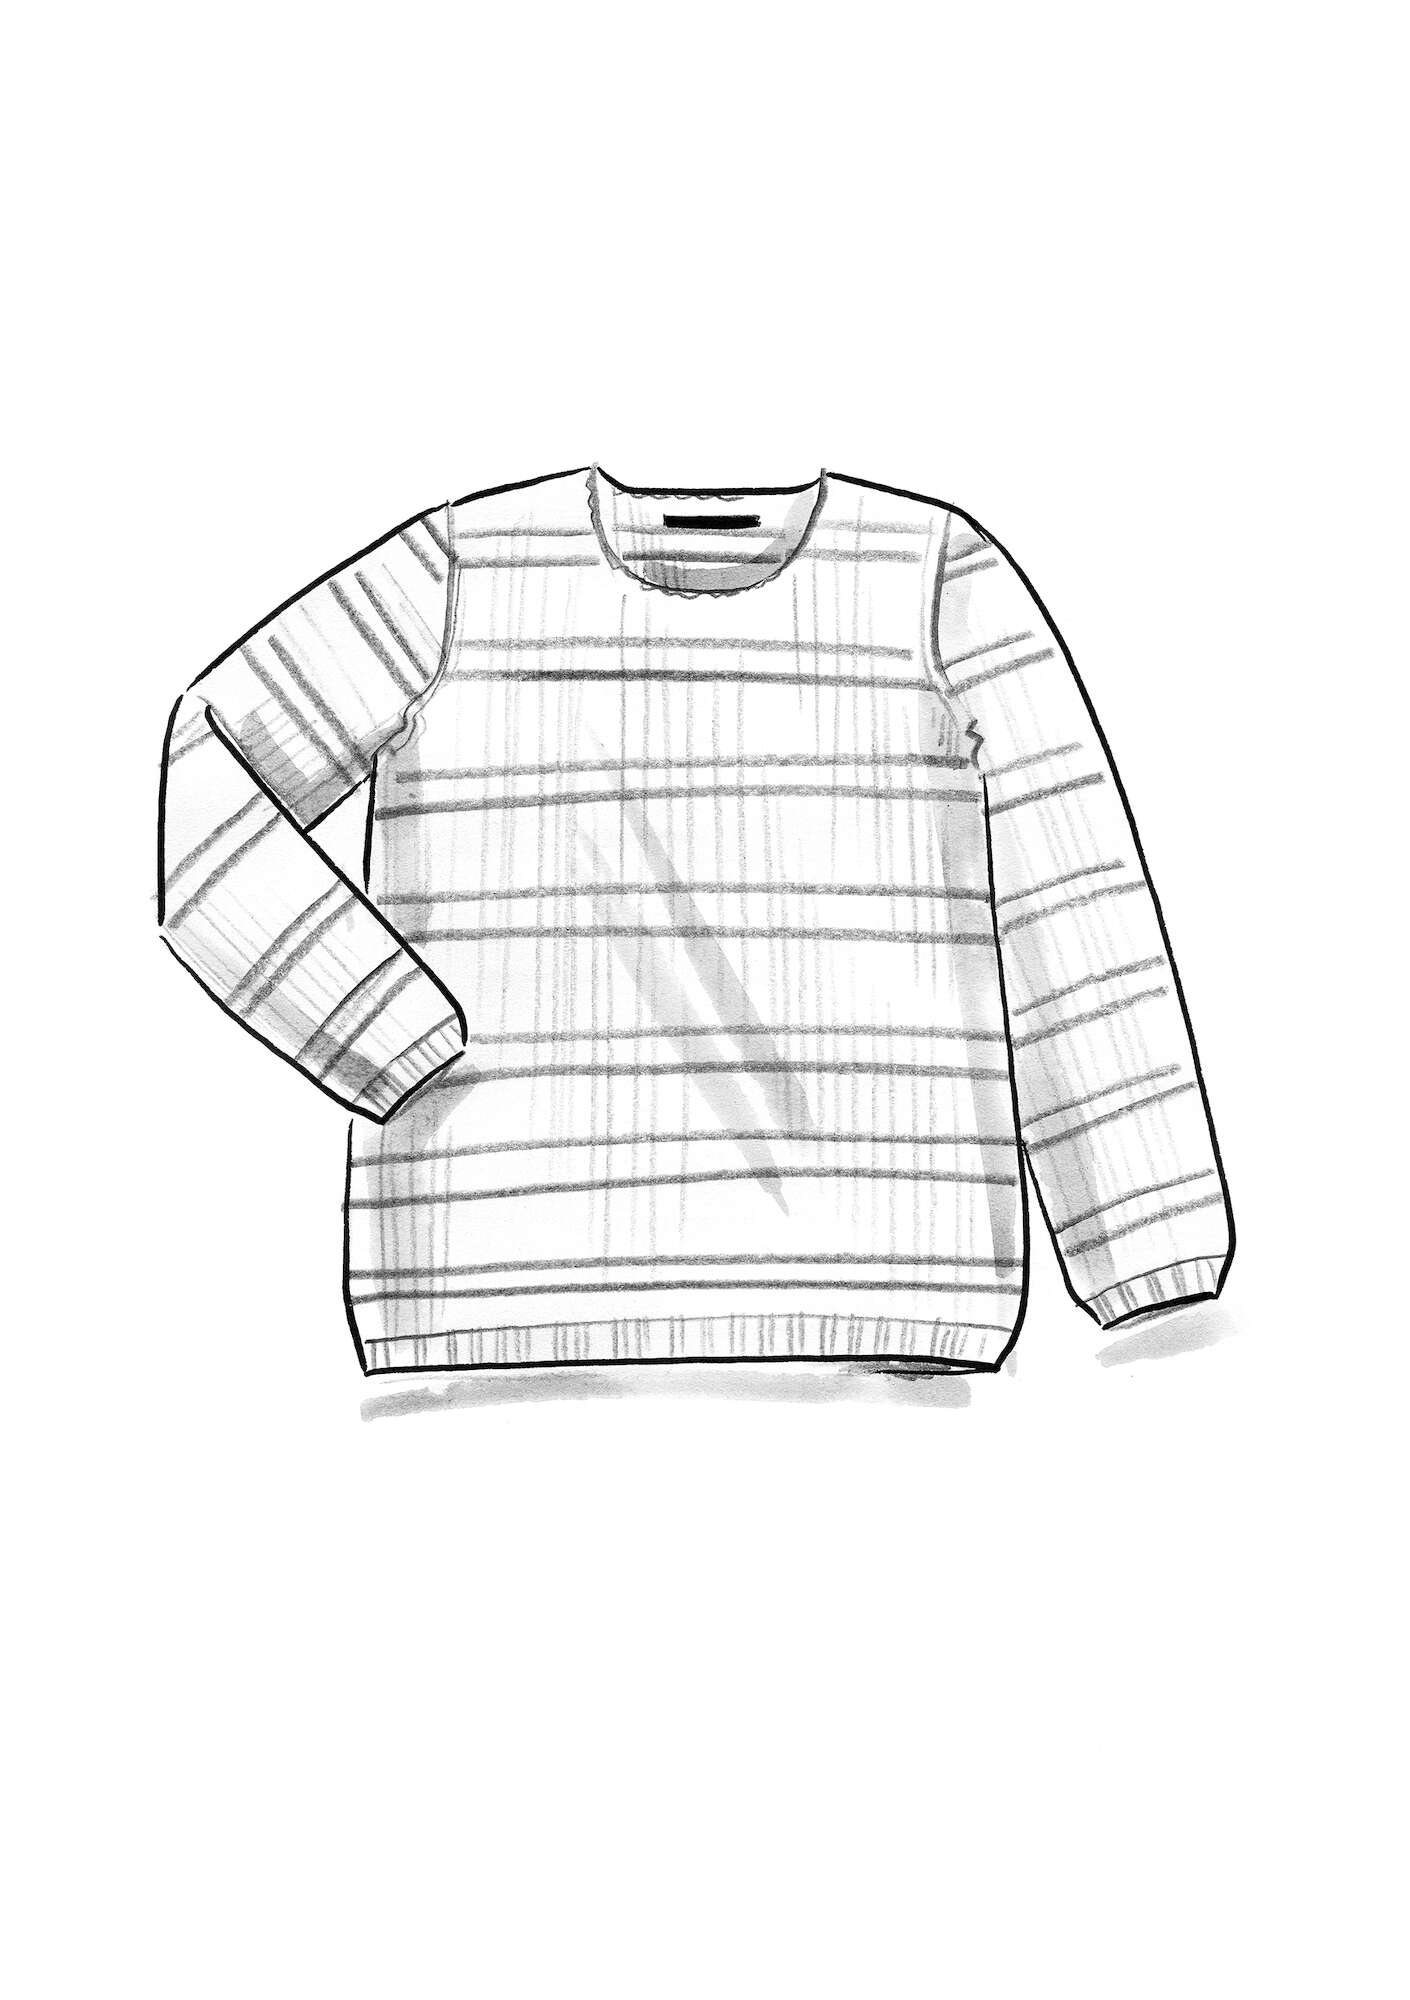 BÄSTIS sweater in recycled cotton unbleached/striped